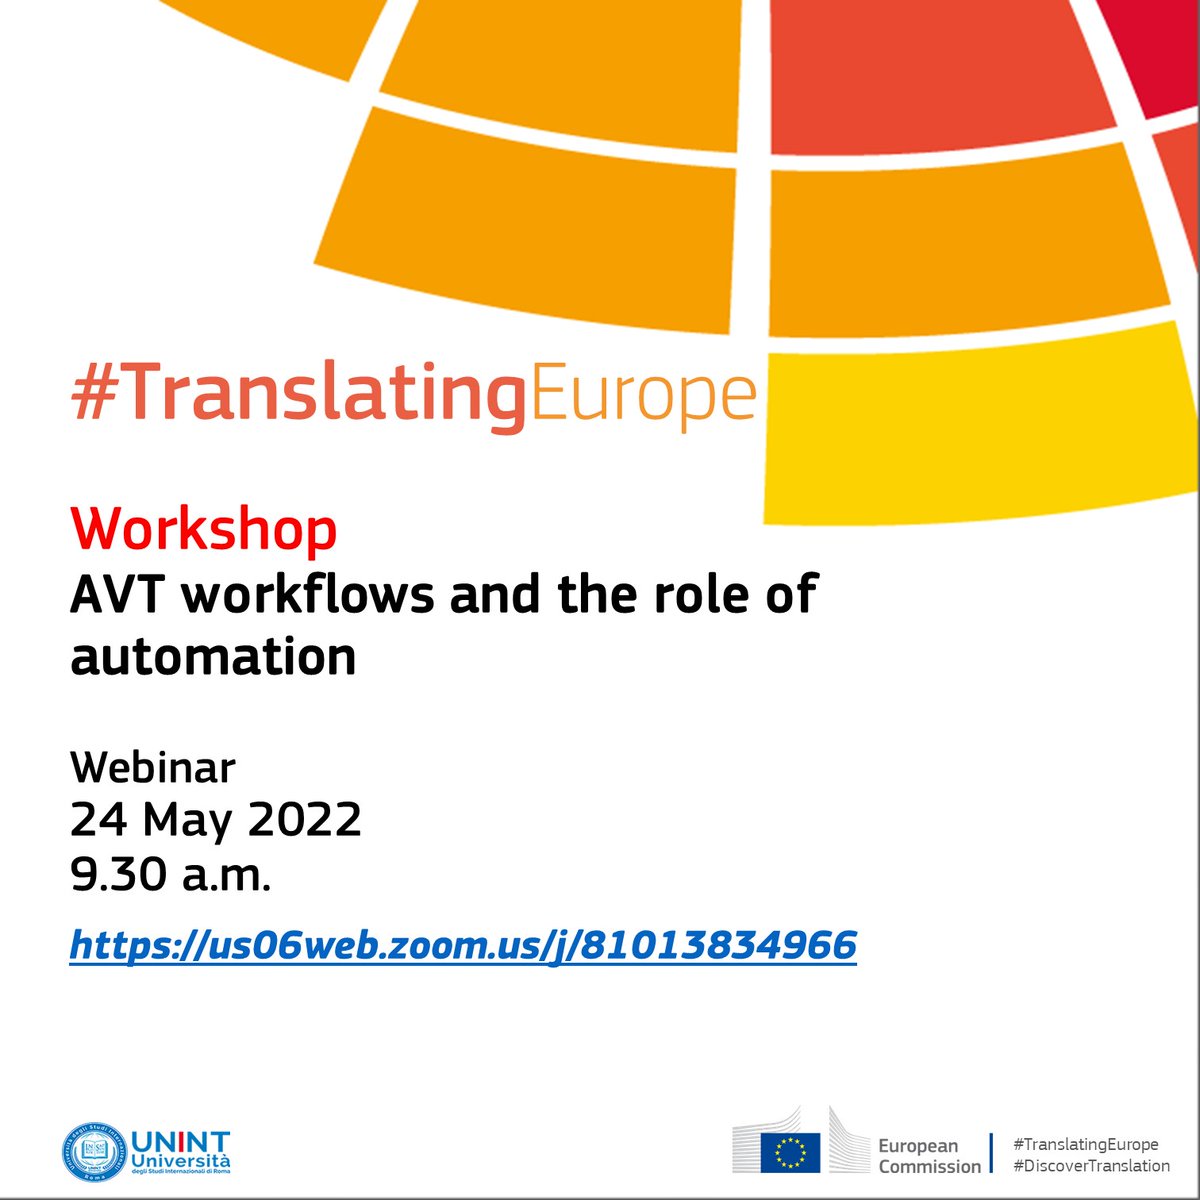 Join the next #TranslatingEurope Workshop “AVT workflows and the role of automation” to discover the benefits and pitfalls of CAT tools in audiovisual translation. 
bit.ly/3FNnIcl
#Translation #xl8 #languages #Translators